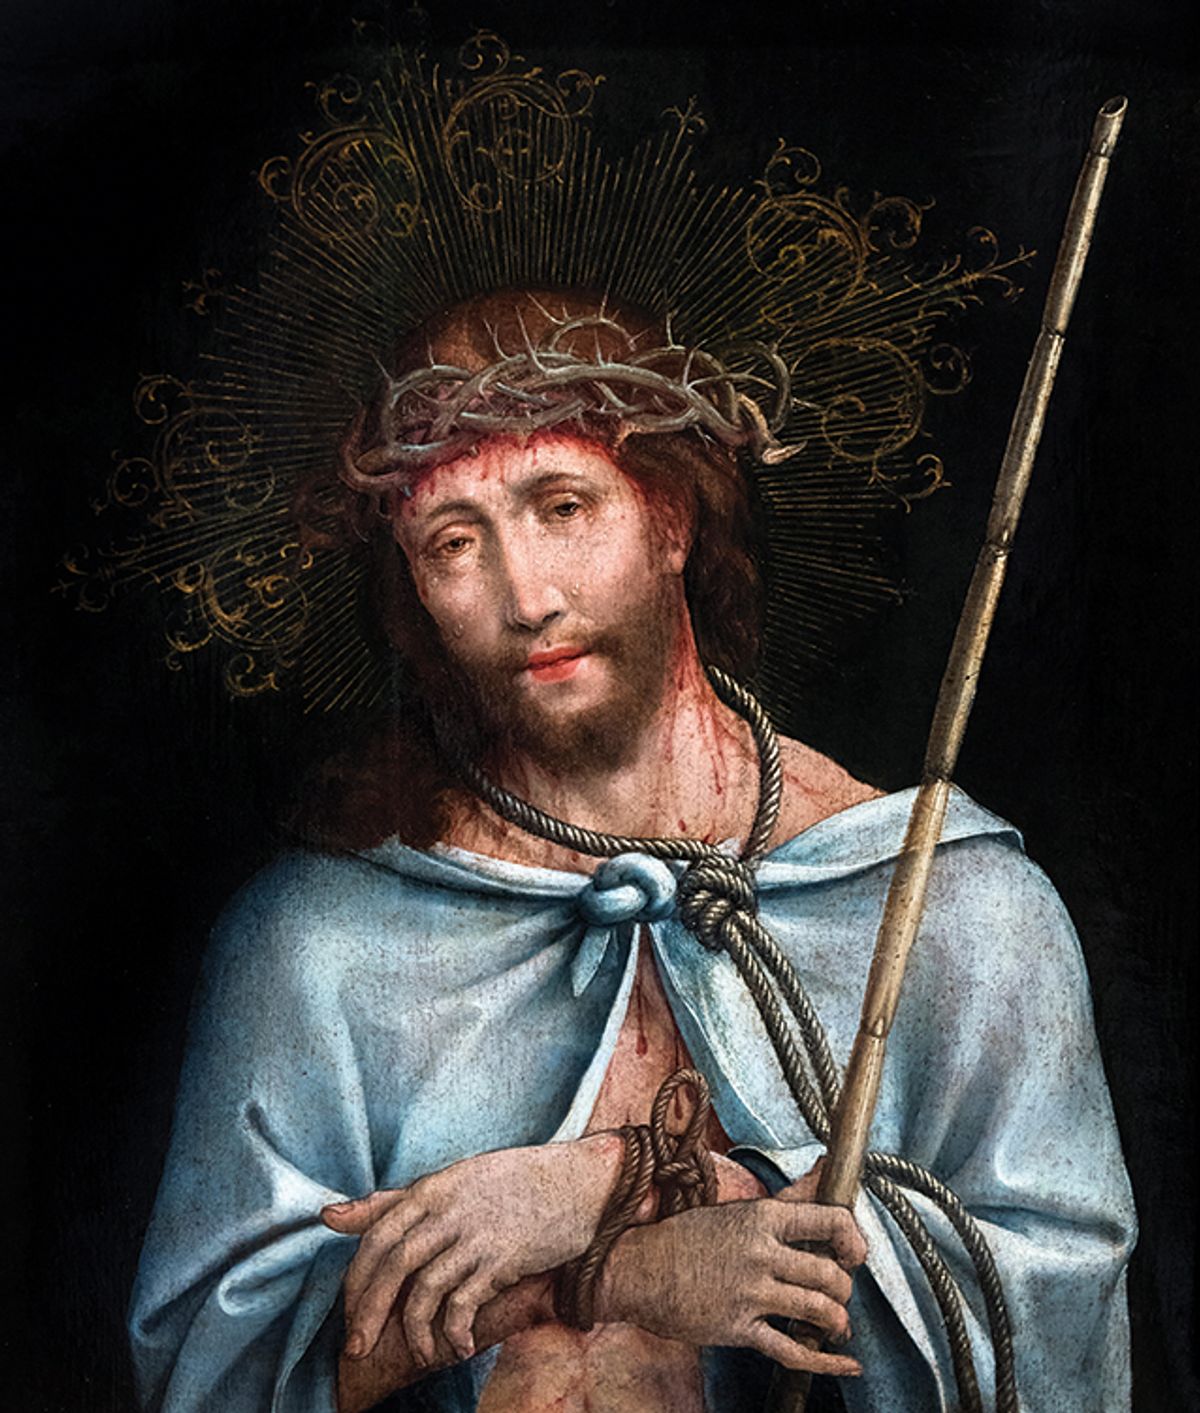 Ecce Homo (1520s) by Frei Carlos; the Flemish-born Portuguese artist and monk could have painted the Kwer’ata Re’esu Ian Dagnall Computing/Alamy Stock Photo